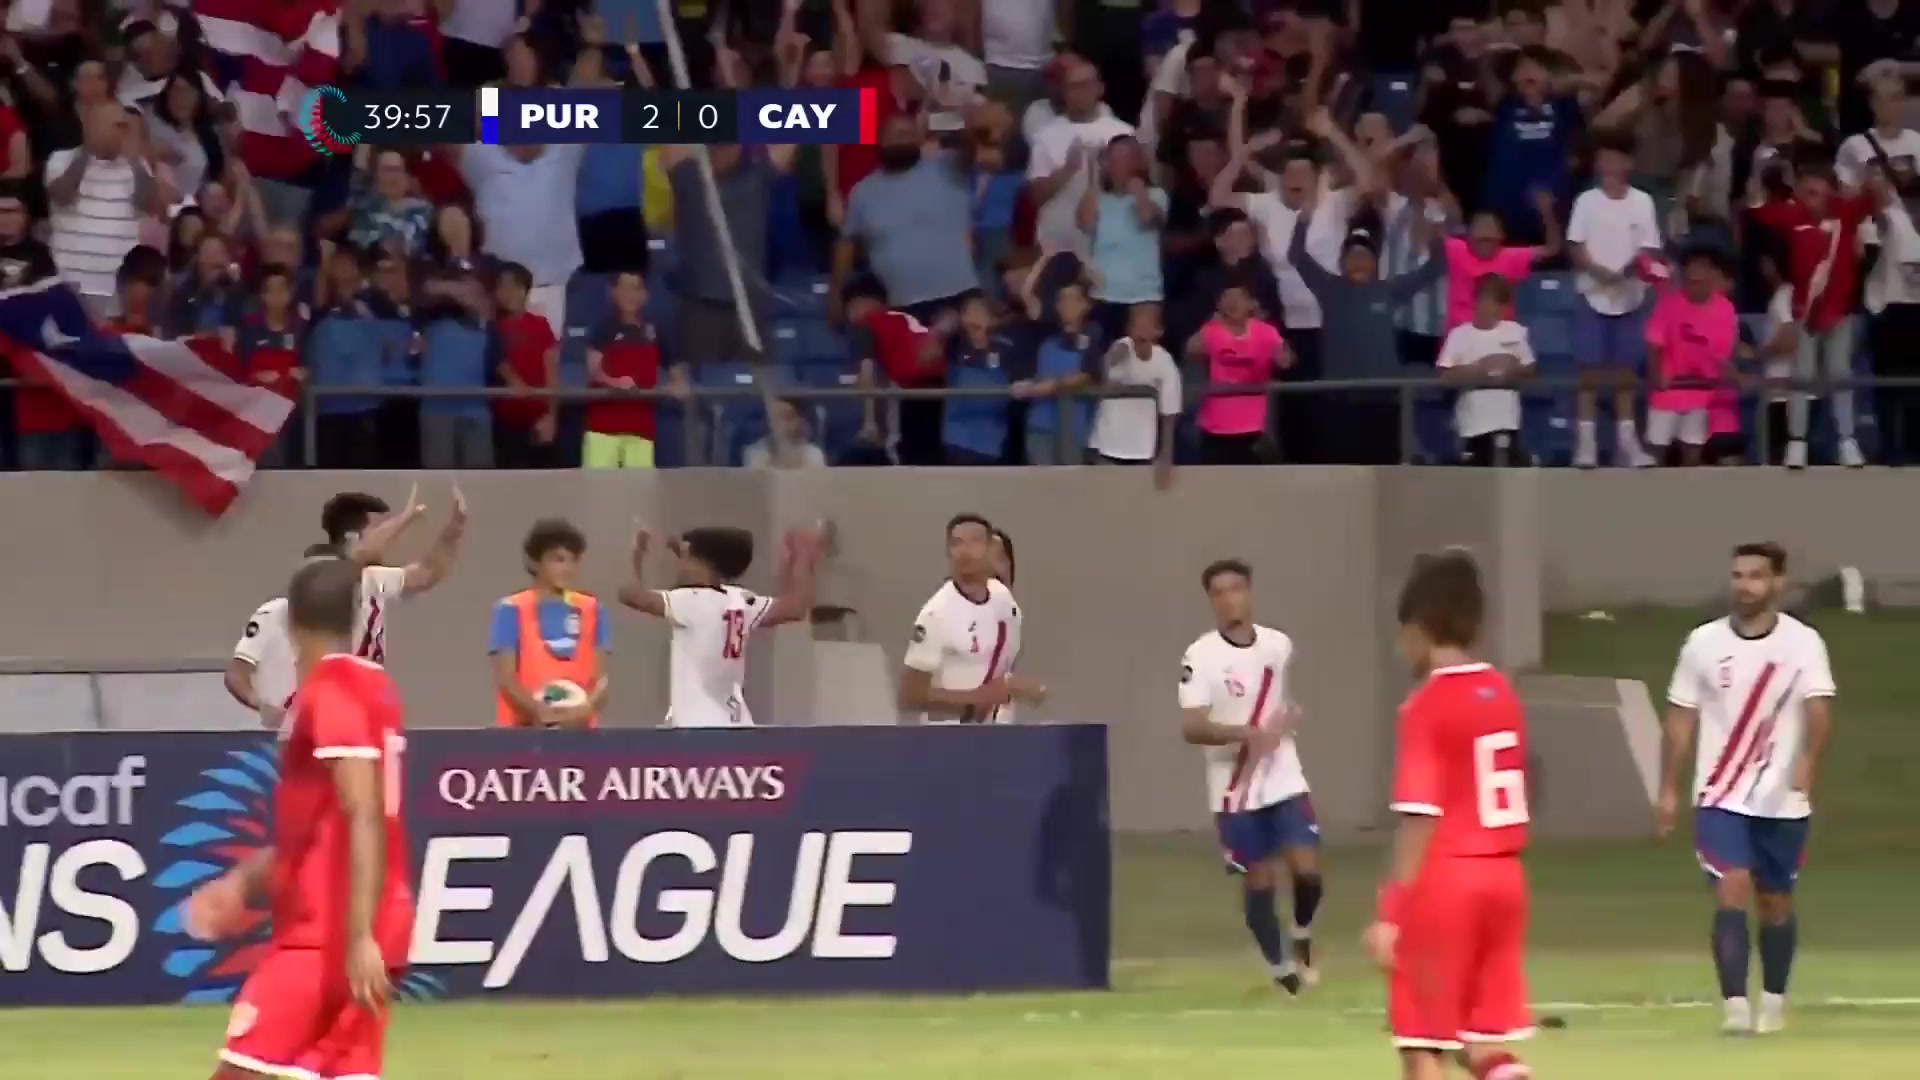 CONCACAF NL Puerto Rico Vs Cayman Islands  Goal in 40 min, Score 2:0